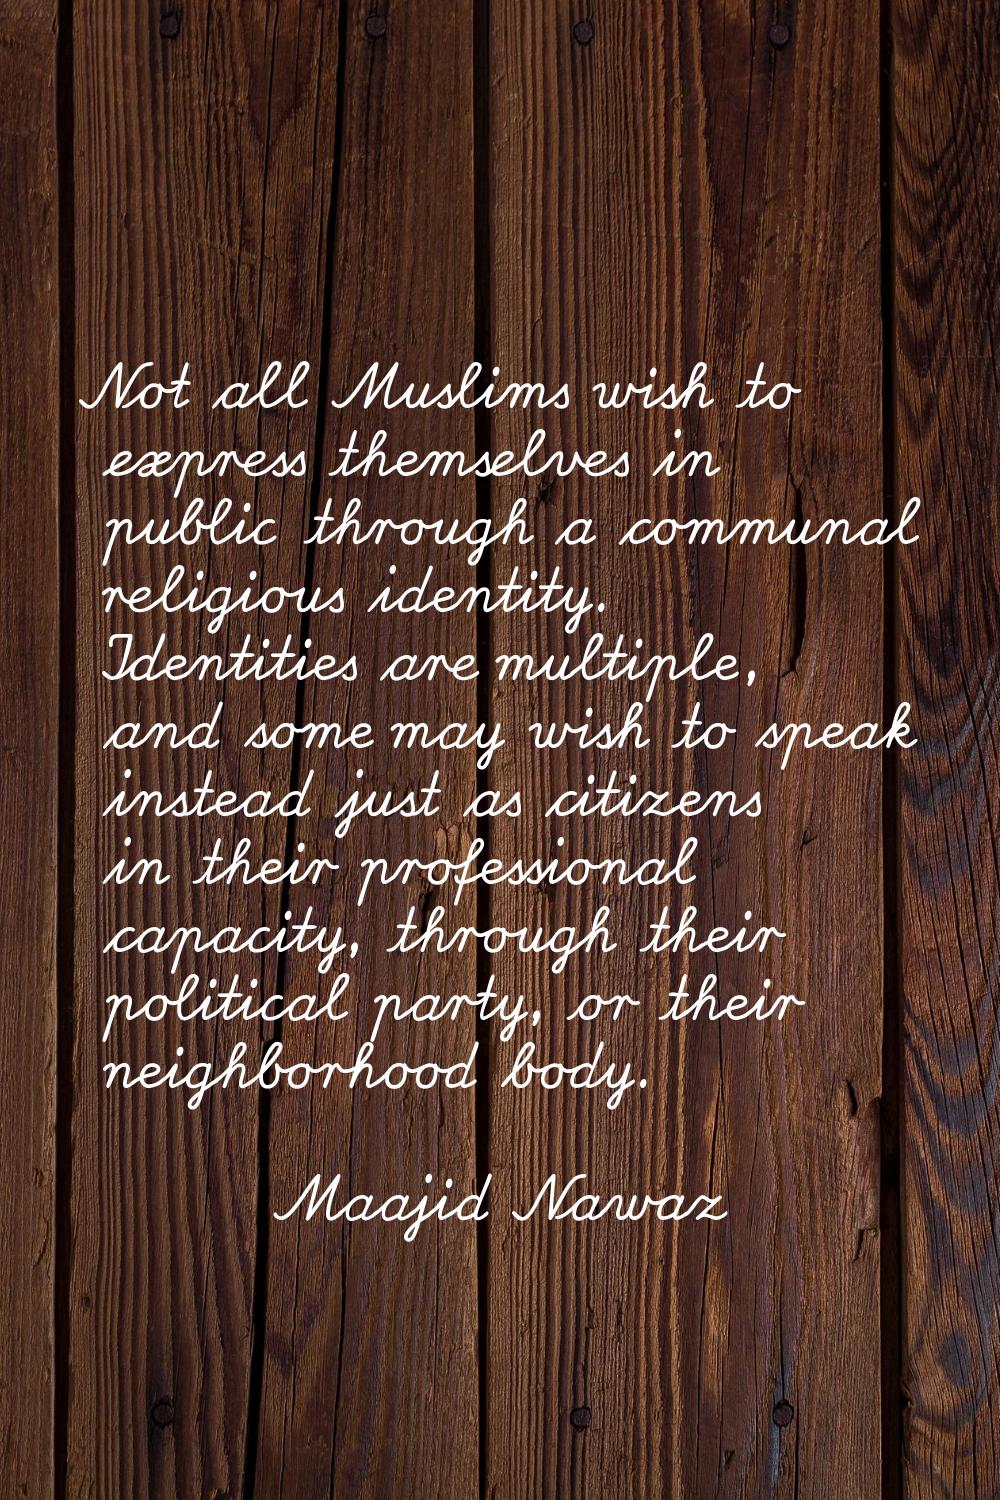 Not all Muslims wish to express themselves in public through a communal religious identity. Identit